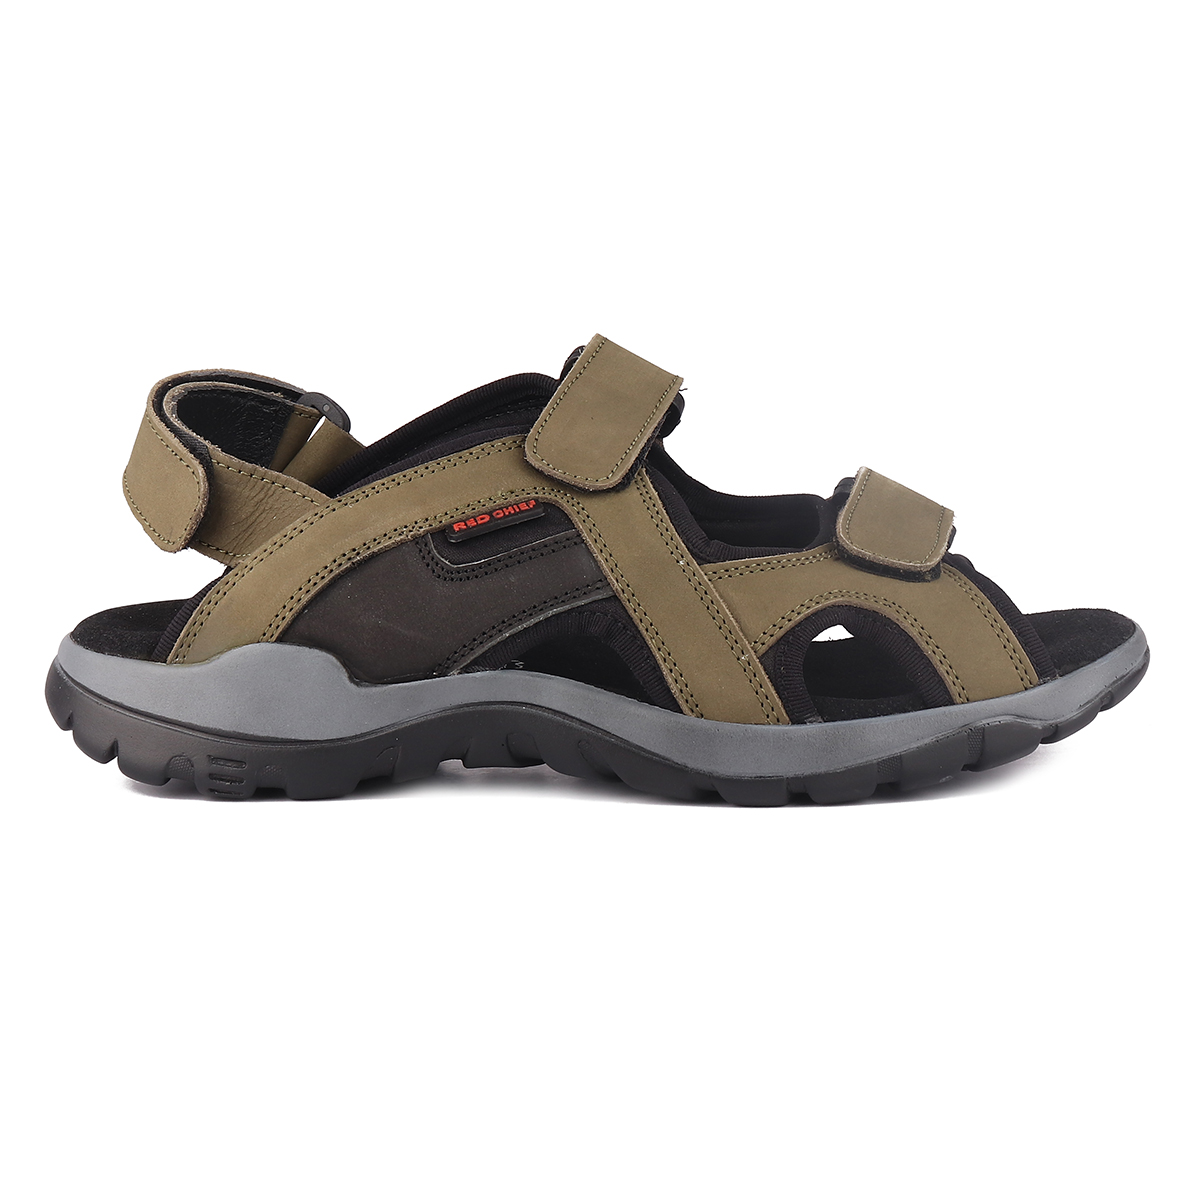 Woodland Men's Sandals Gs4011CMA/Woodland New Collection - YouTube